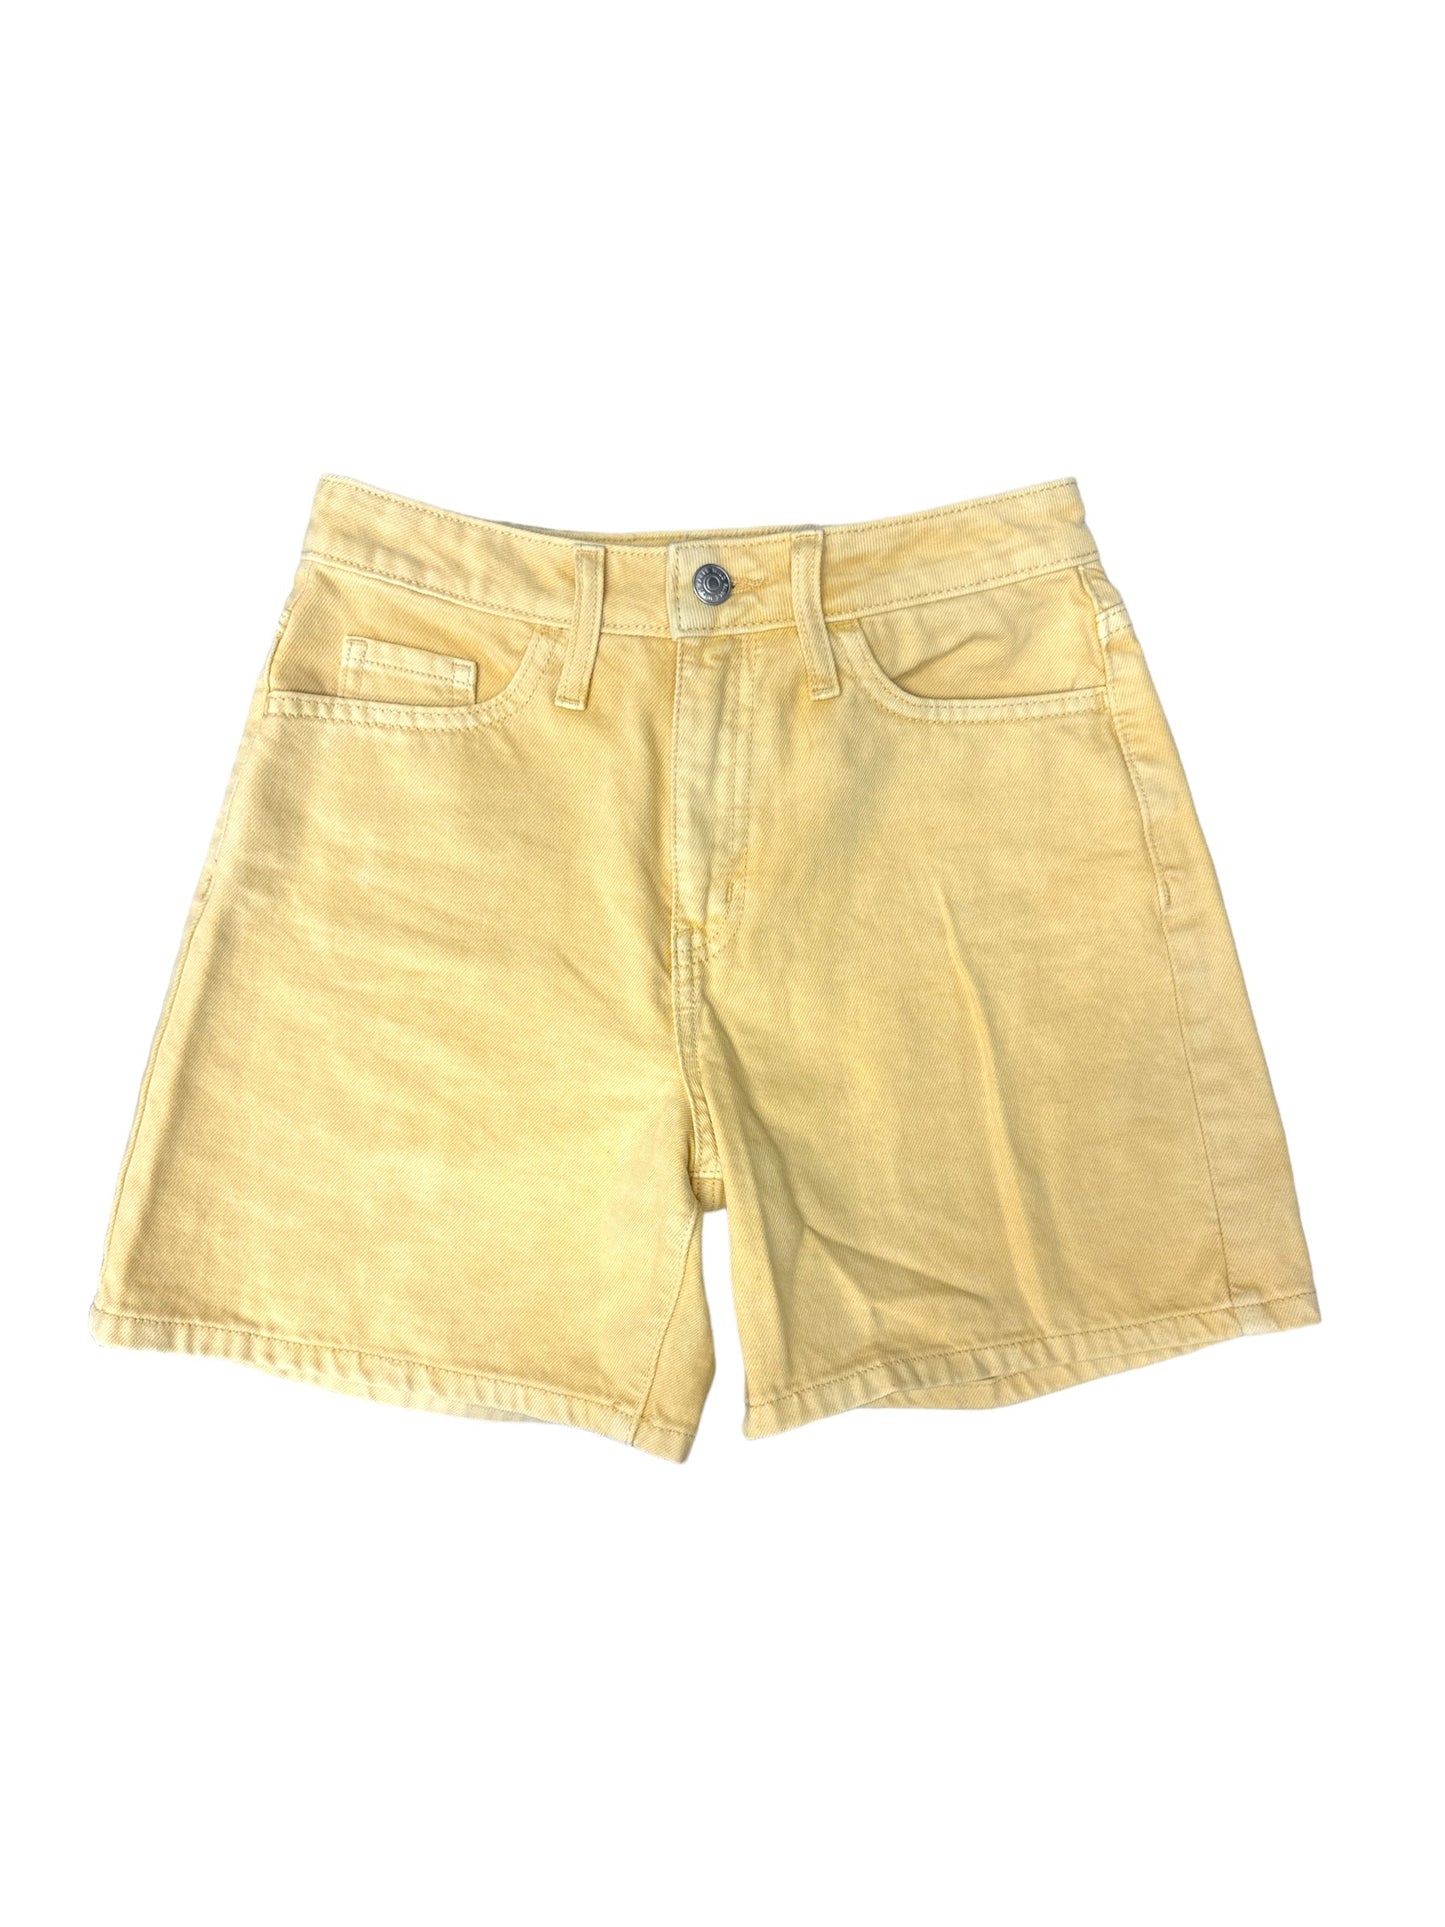 Yellow Shorts Wild Fable, Size 00